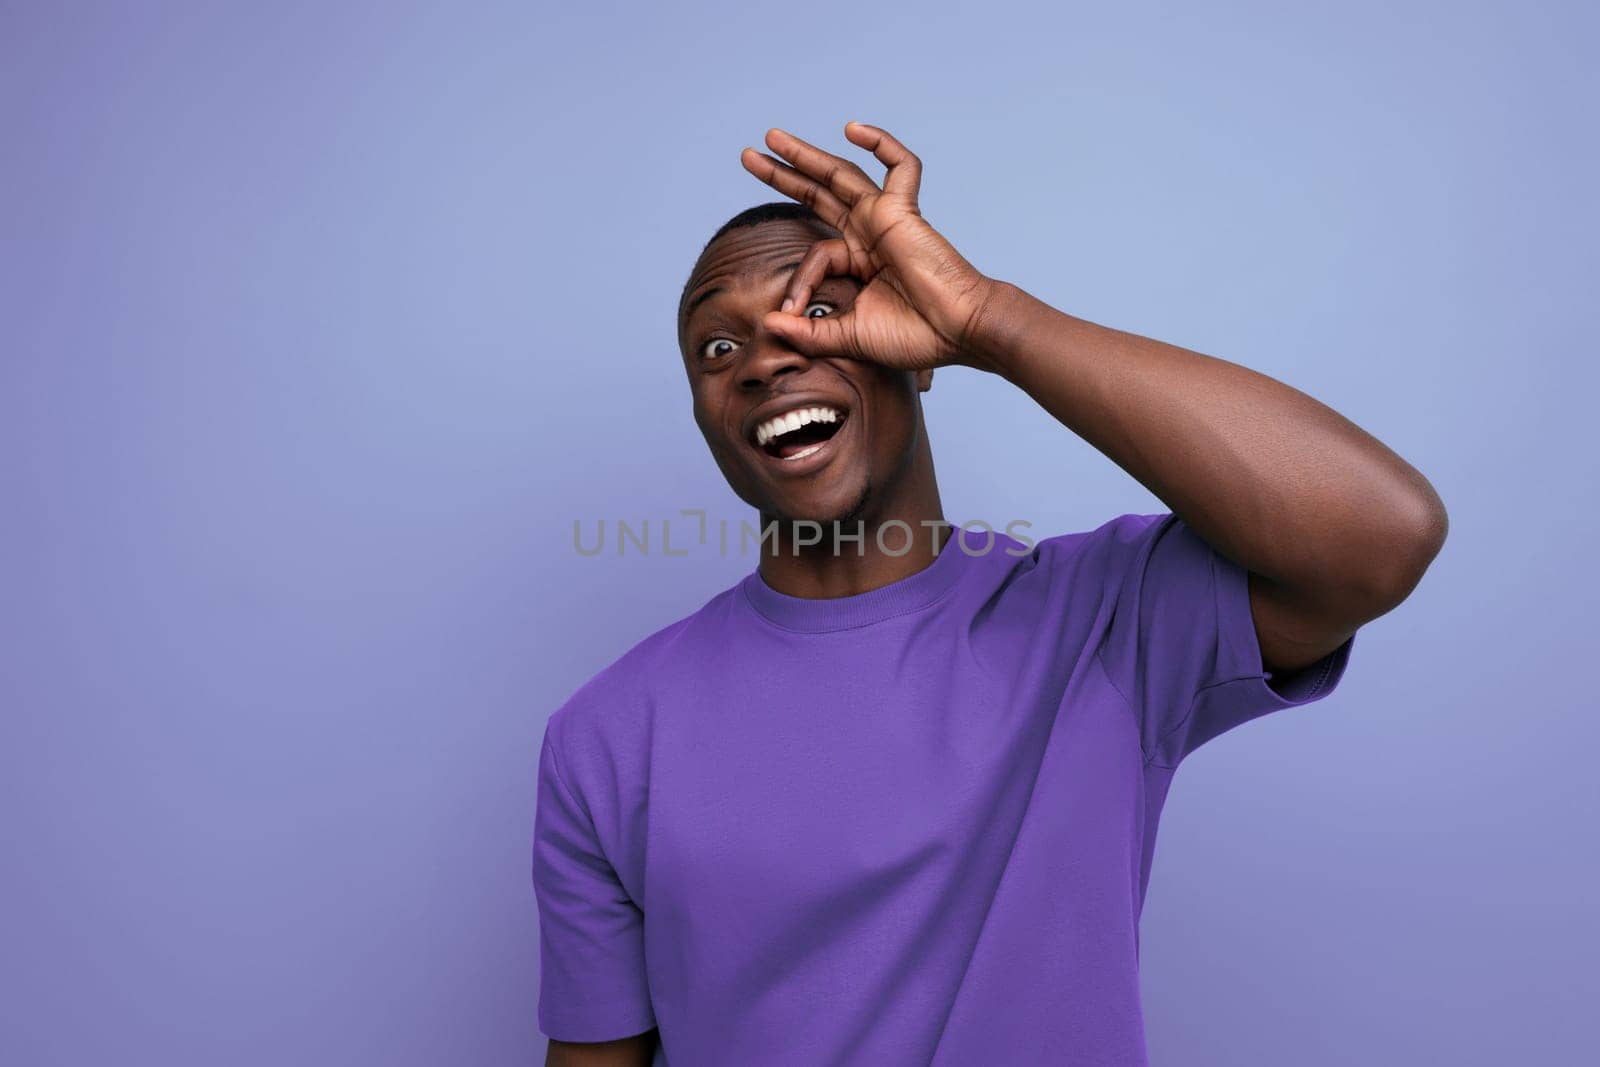 young positive friendly african guy with a short haircut dressed in a basic t-shirt against the background with copy space.